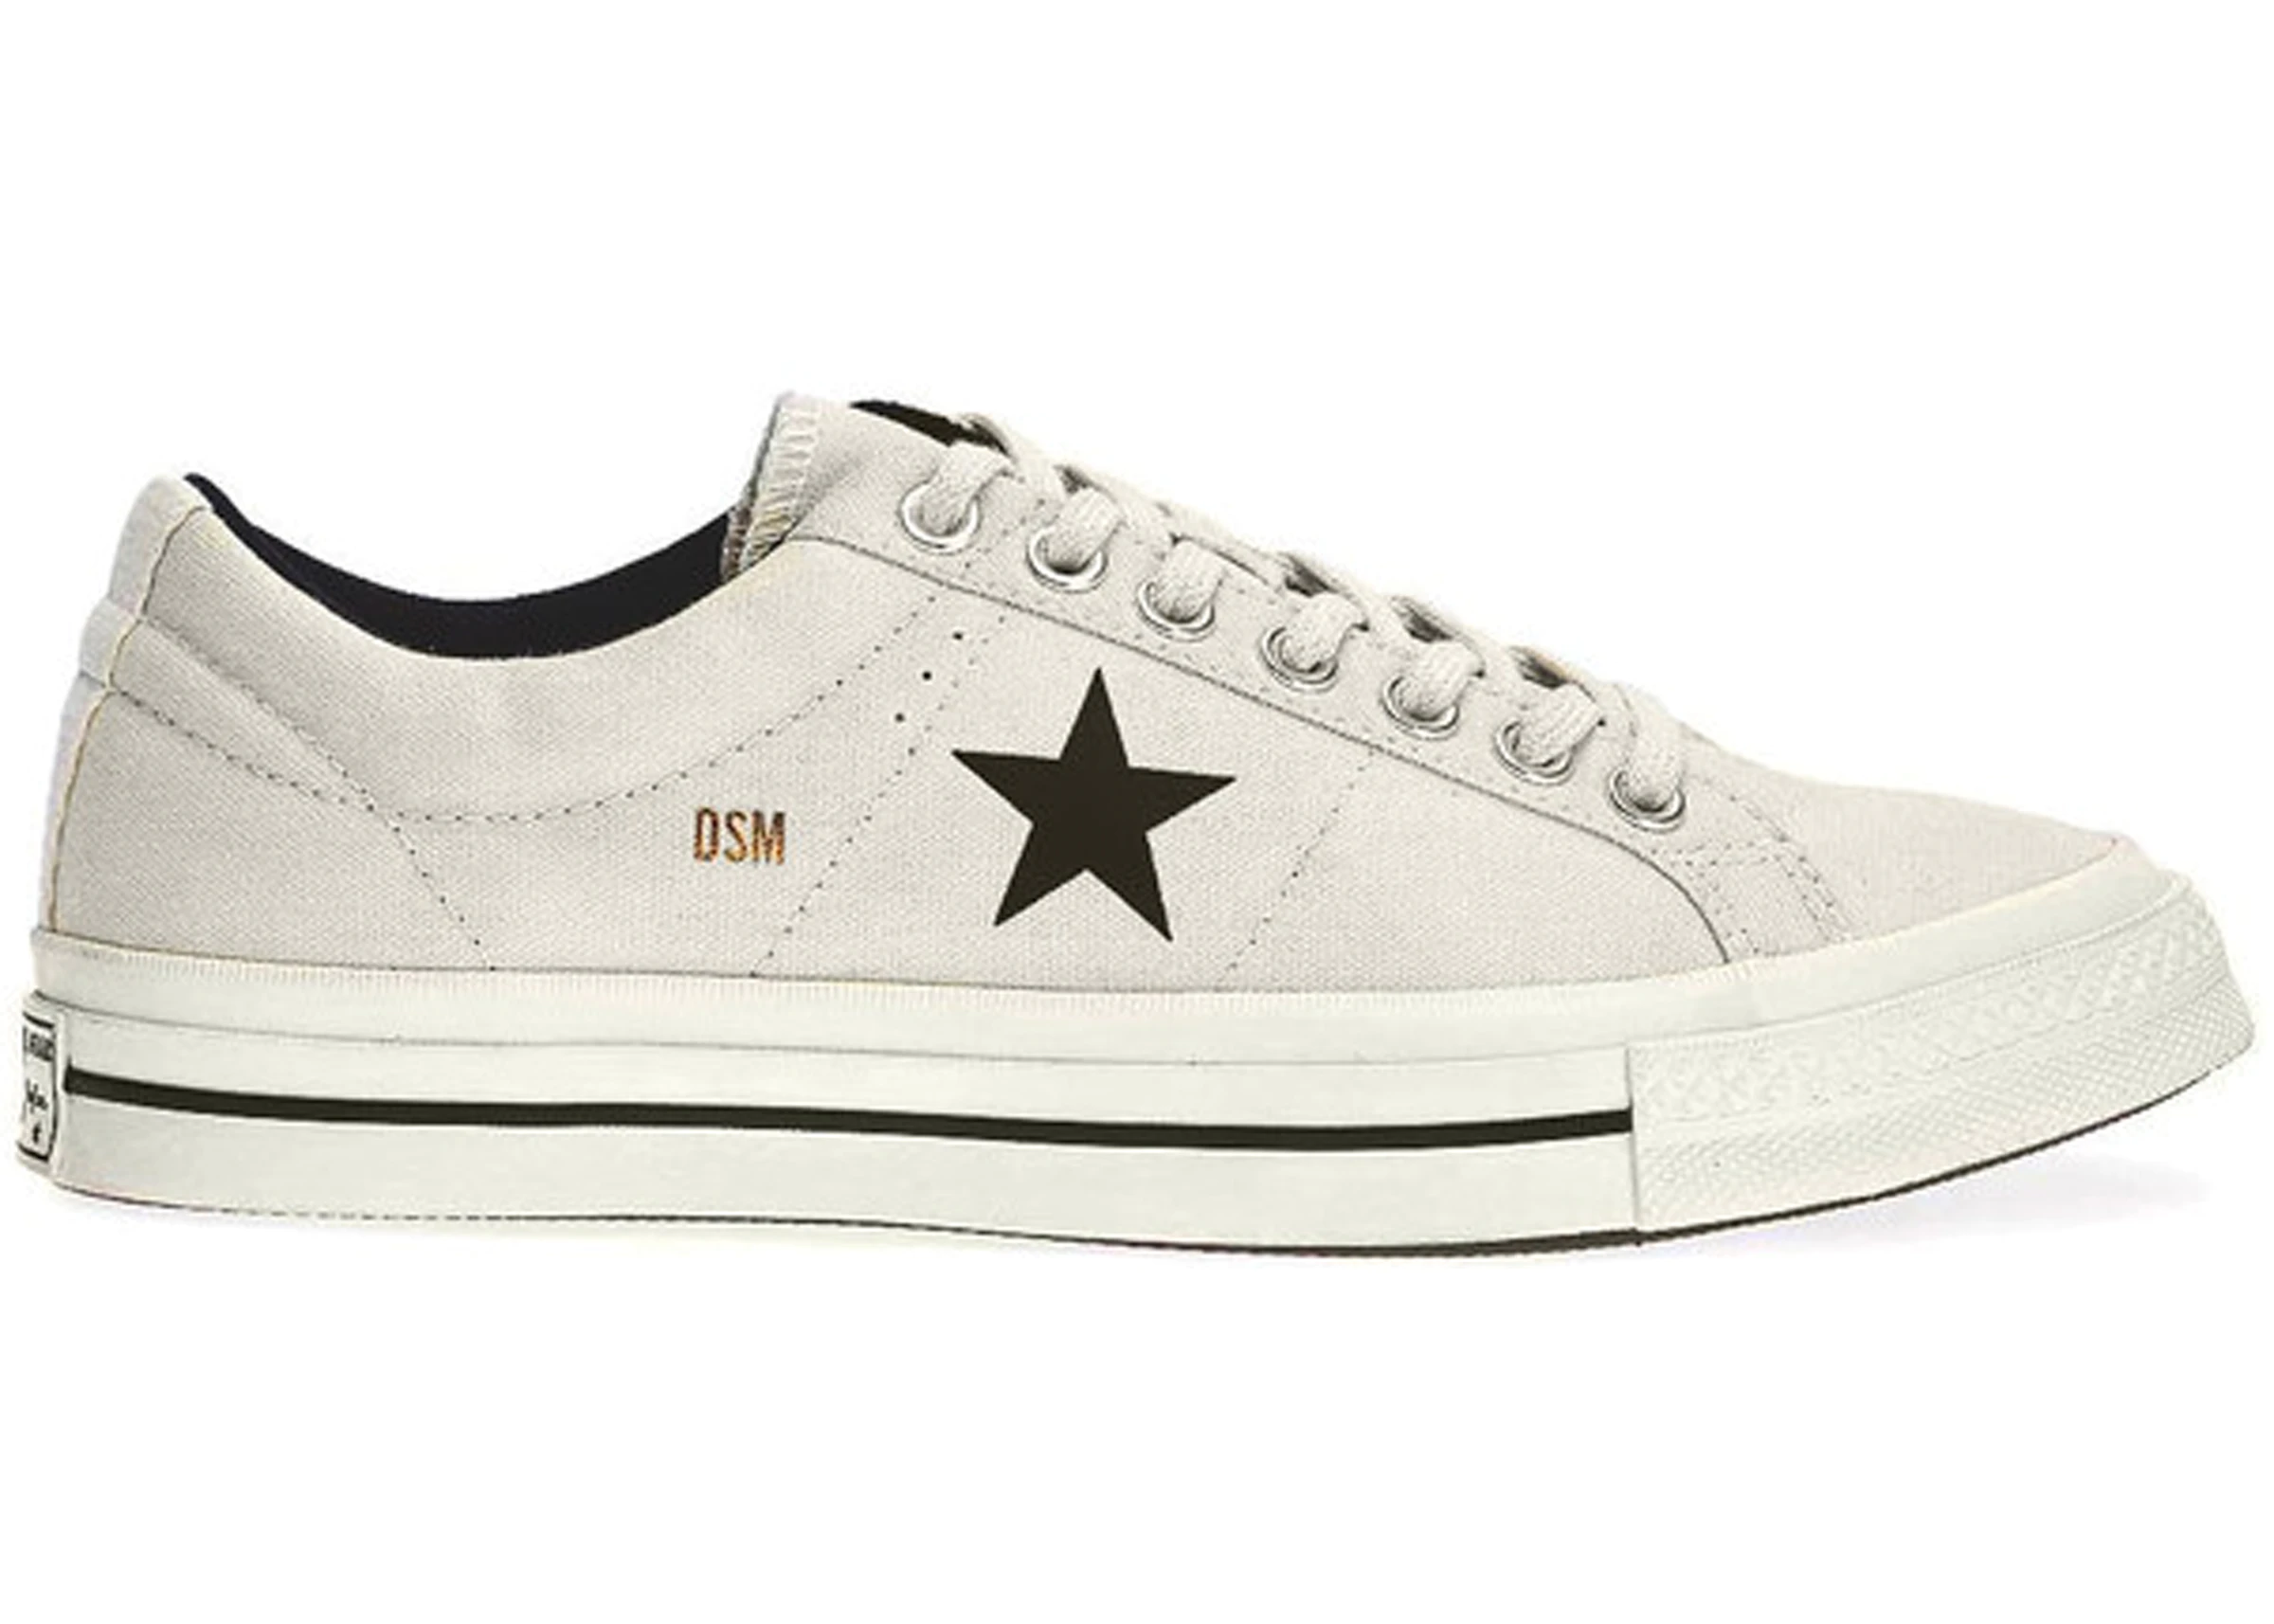 Converse One Star Canvas Ox Dover Street Market White - 162293C - US